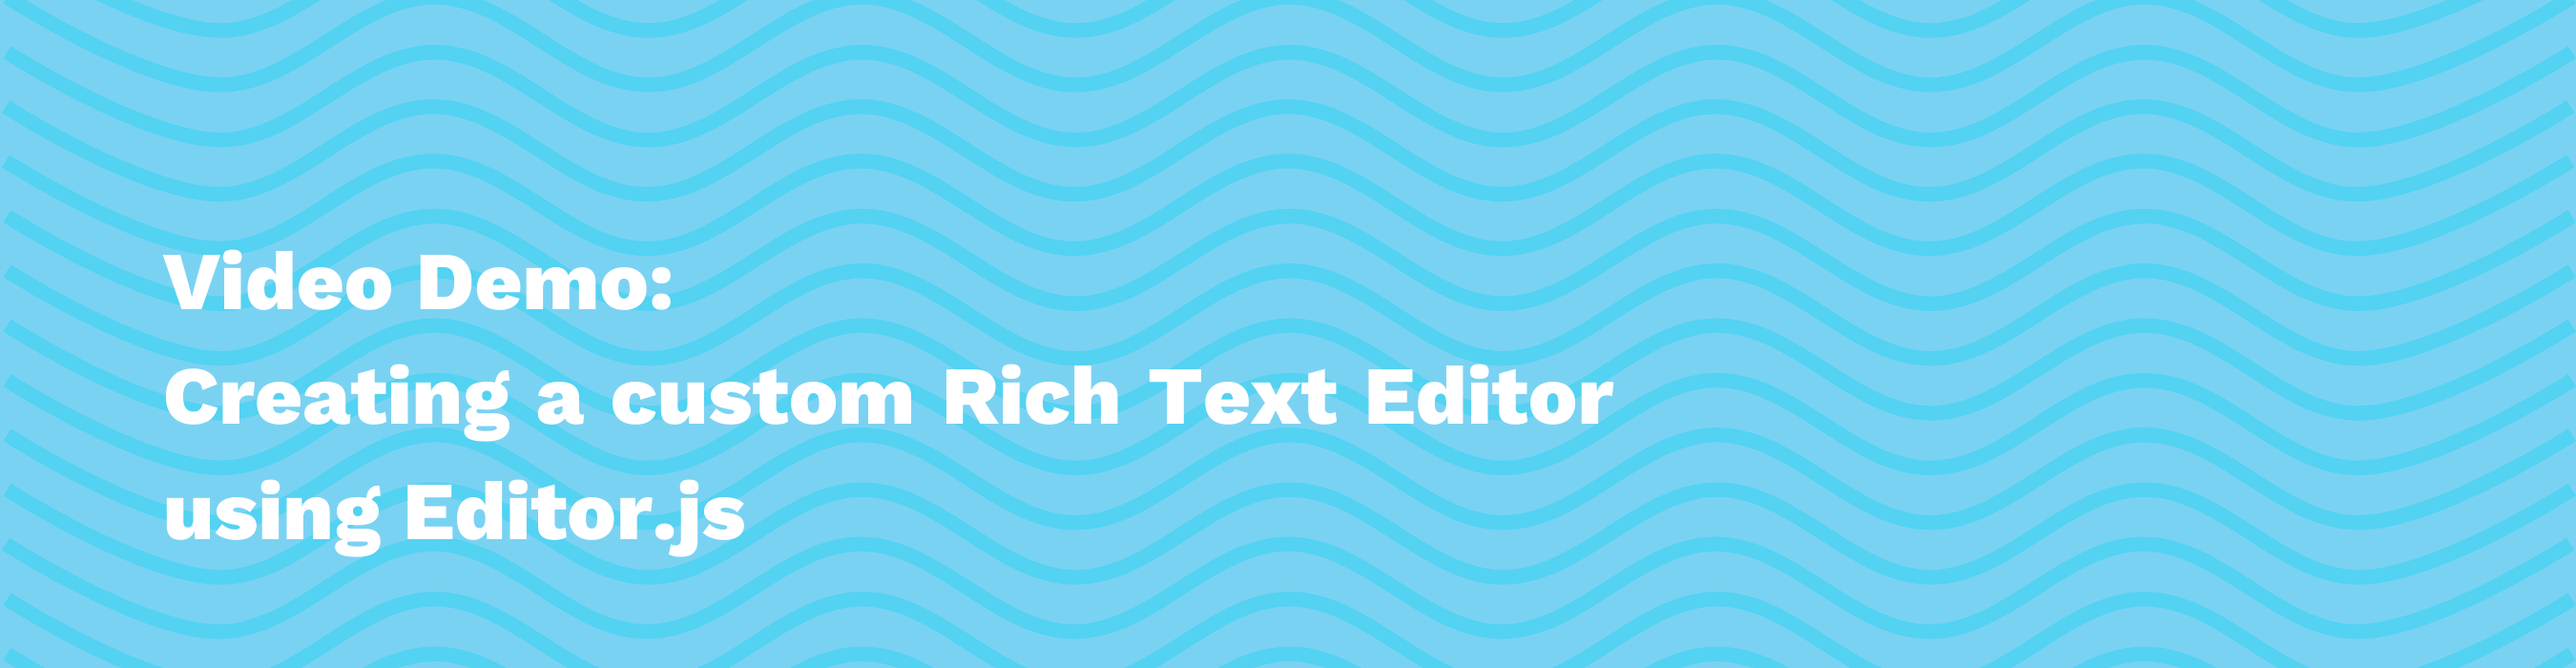 Video Demo: Creating a Custom Rich Text Editor for AEM using Editor.js